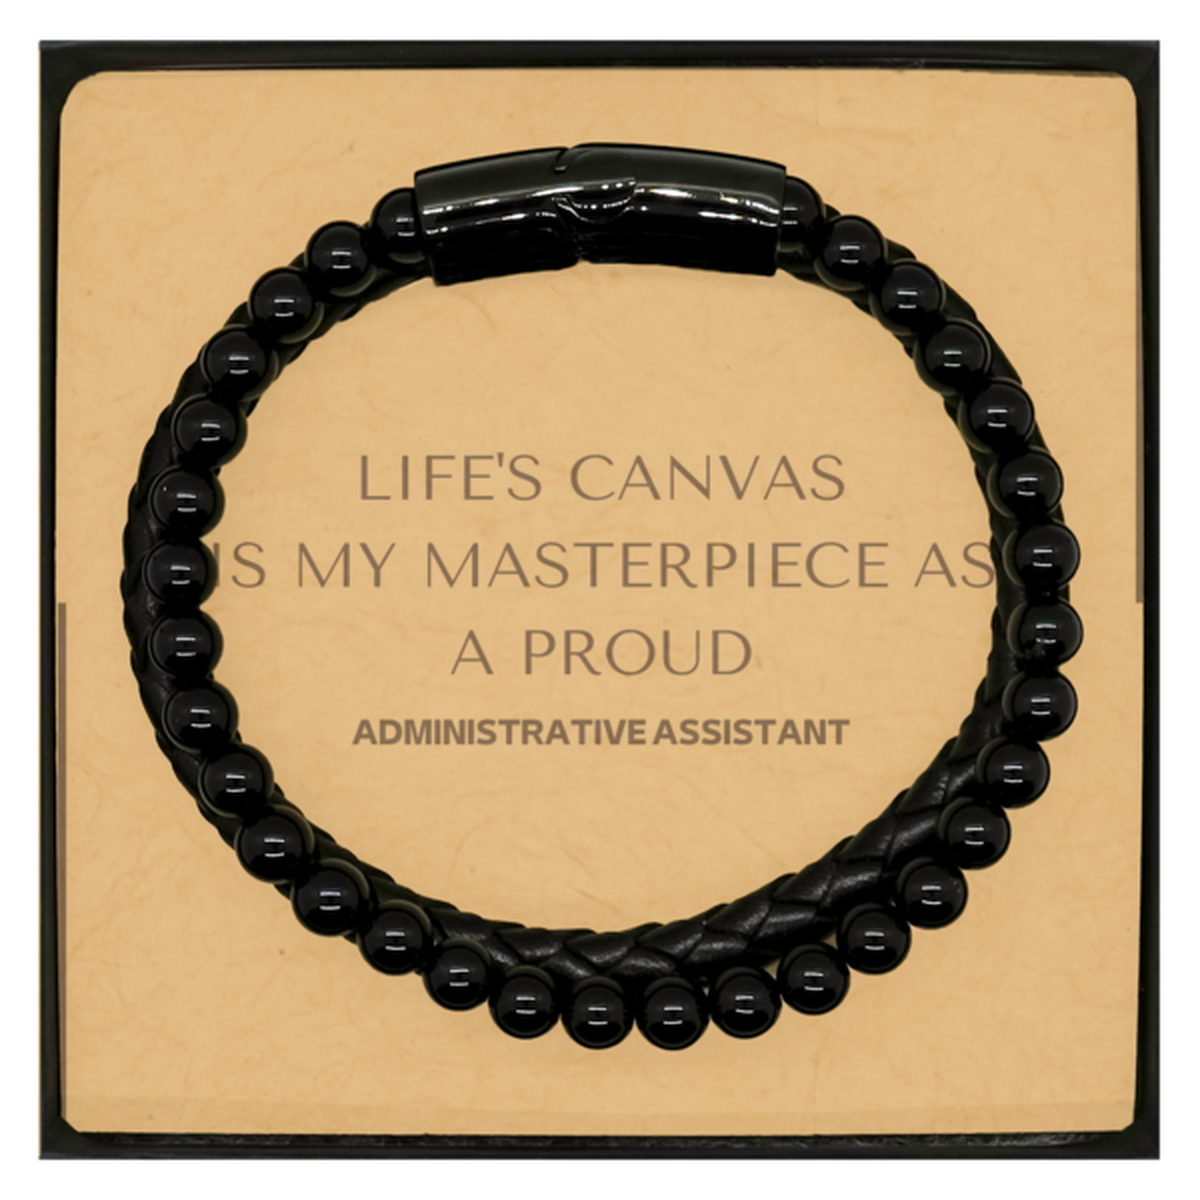 Proud Administrative Assistant Gifts, Life's canvas is my masterpiece, Epic Birthday Christmas Unique Stone Leather Bracelets For Administrative Assistant, Coworkers, Men, Women, Friends